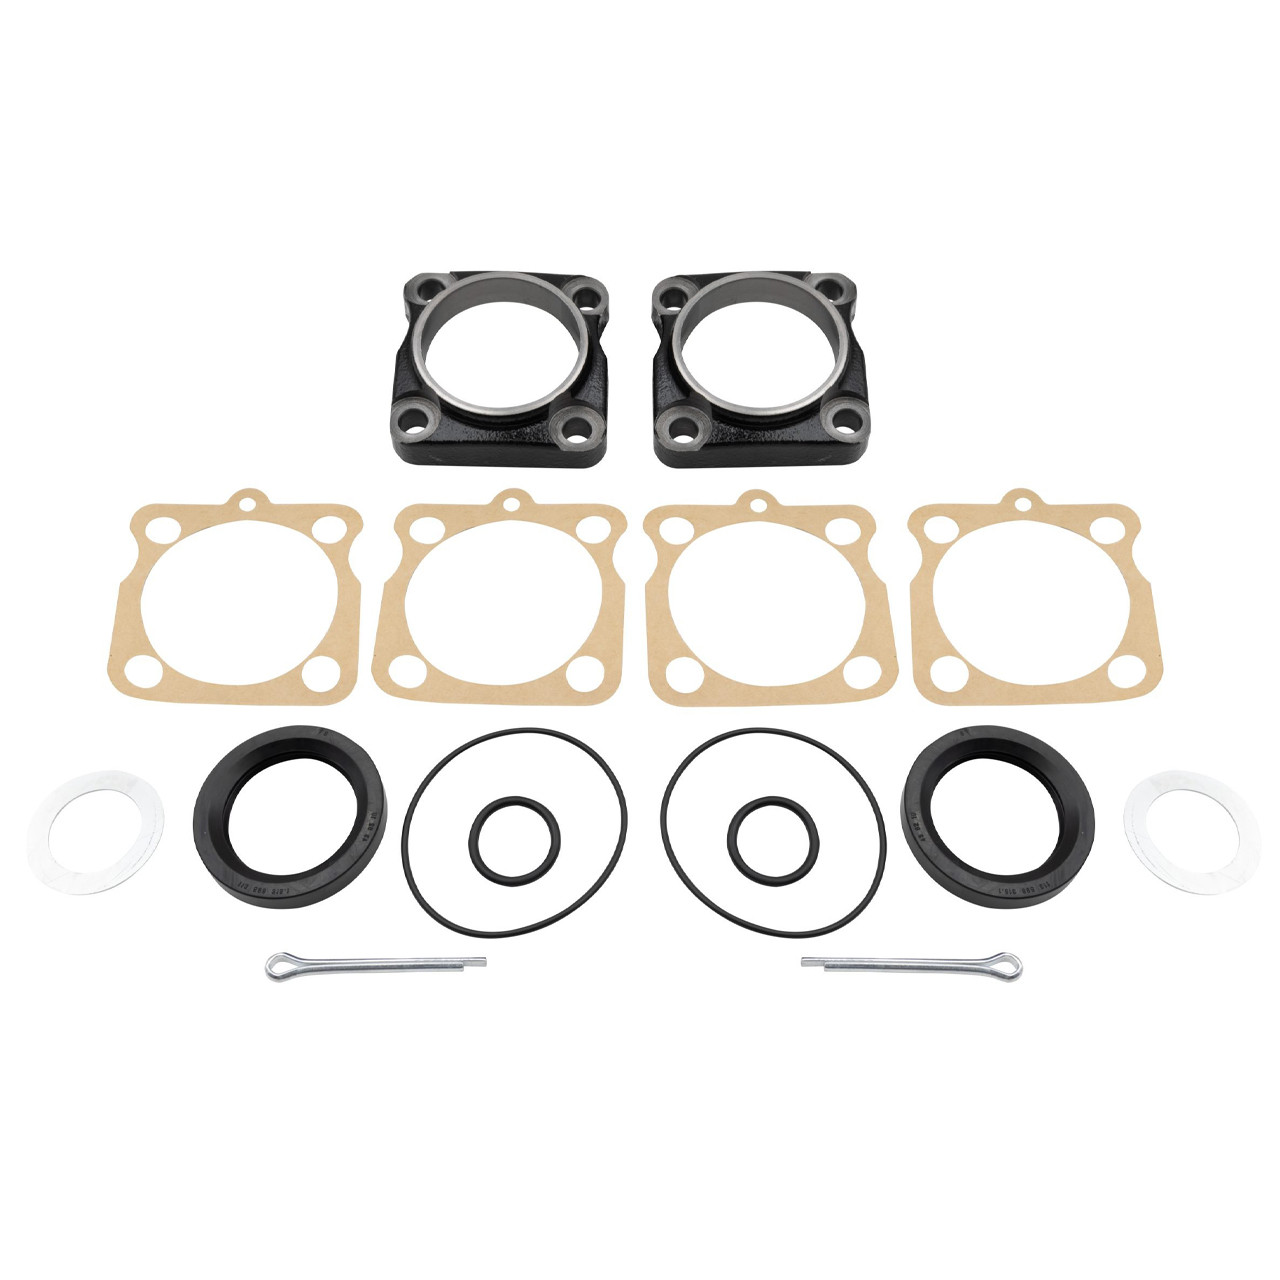 Image of VWC-311-501-311-SET - COMPLETE REAR AXLE BEARING CAP AND SEAL KIT - BOTH SIDES - BEETLE 61-66 - GHIA 61-66 - TYPE-3 62-66 - SOLD SET